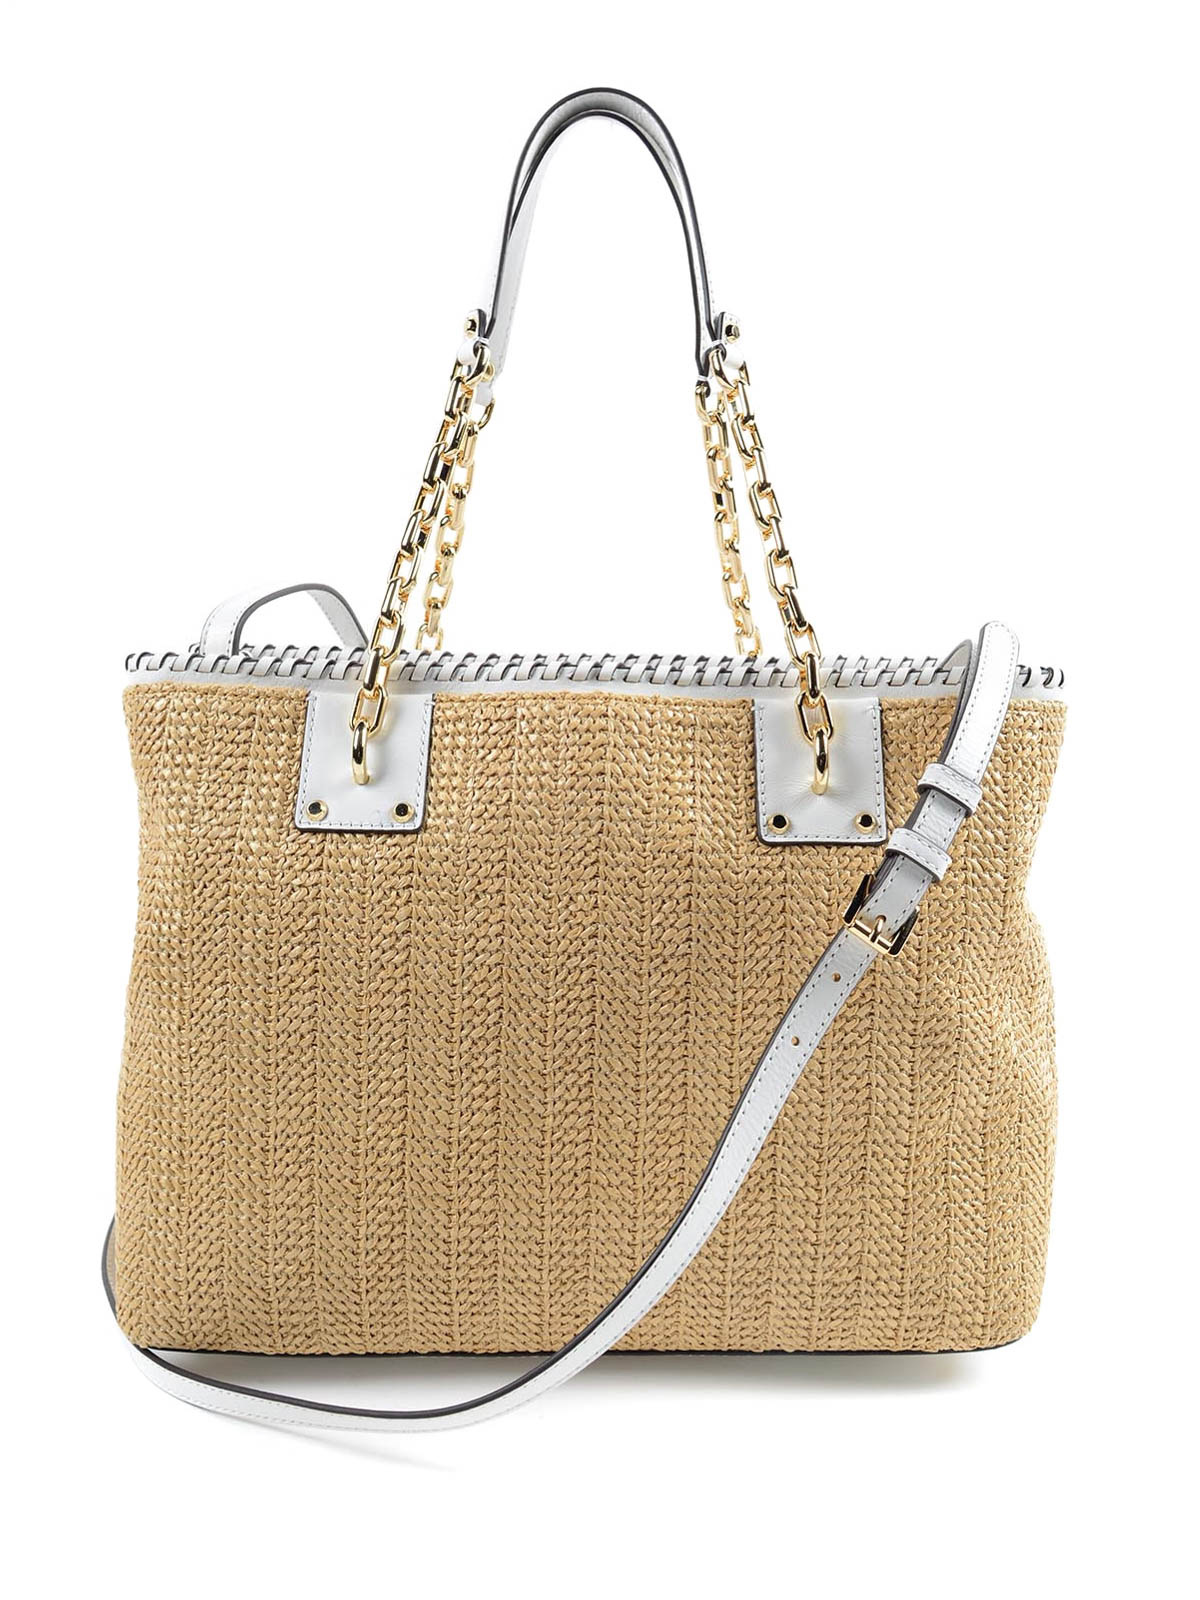 Totes bags Michael Kors - Straw Rosalie large tote - 30S6GS4T7W085